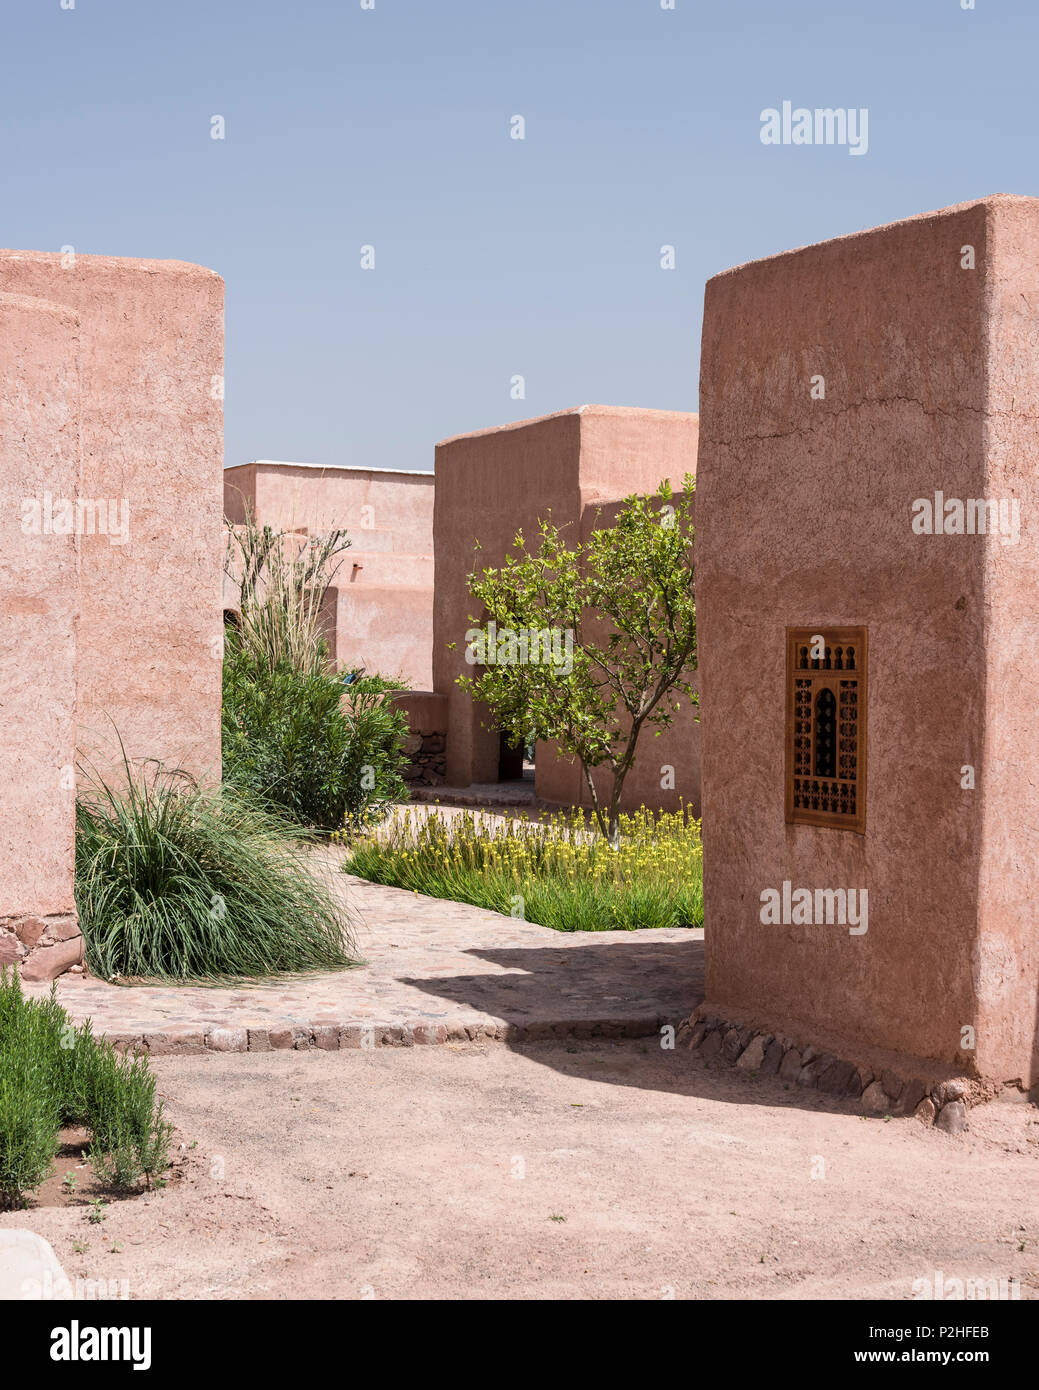 Exterior facade of adobe Berber style lodges with courtyard of lemon trees, bamboo and moroccan wild plants Stock Photo